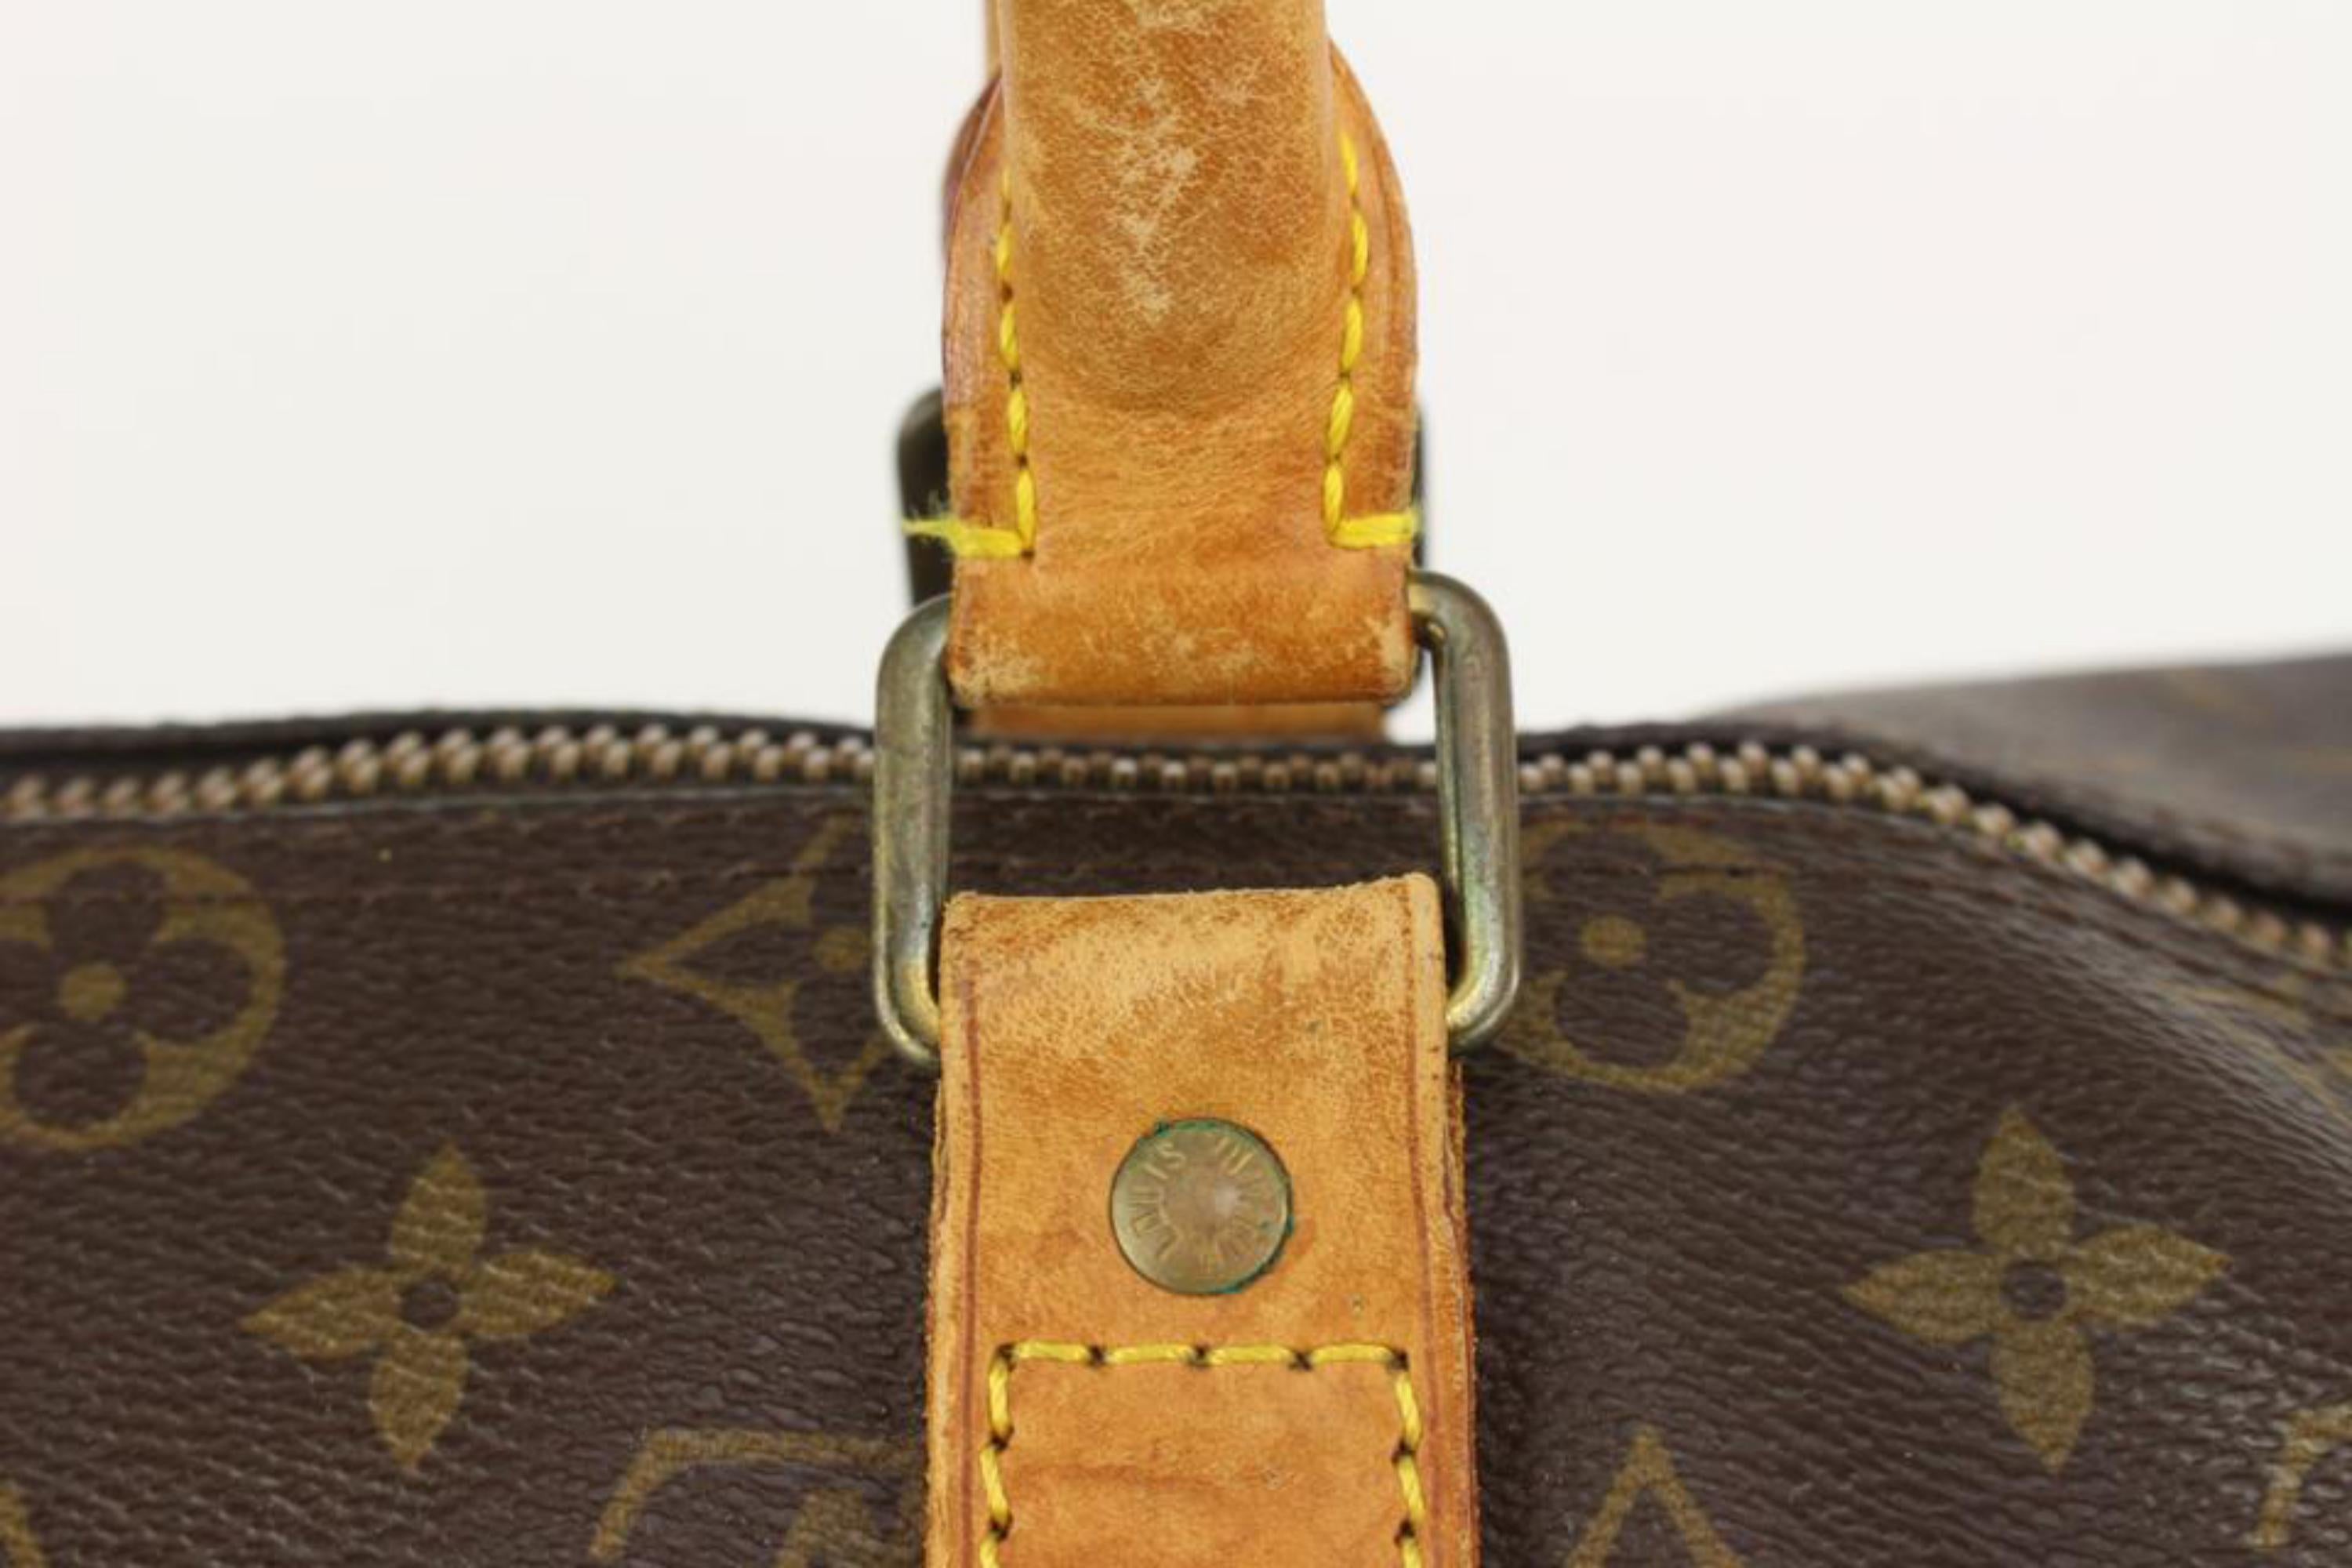 Louis Vuitton Monogram Keepall Bandouliere 45 Duffle Bag with Strap 1122lv11 For Sale 4